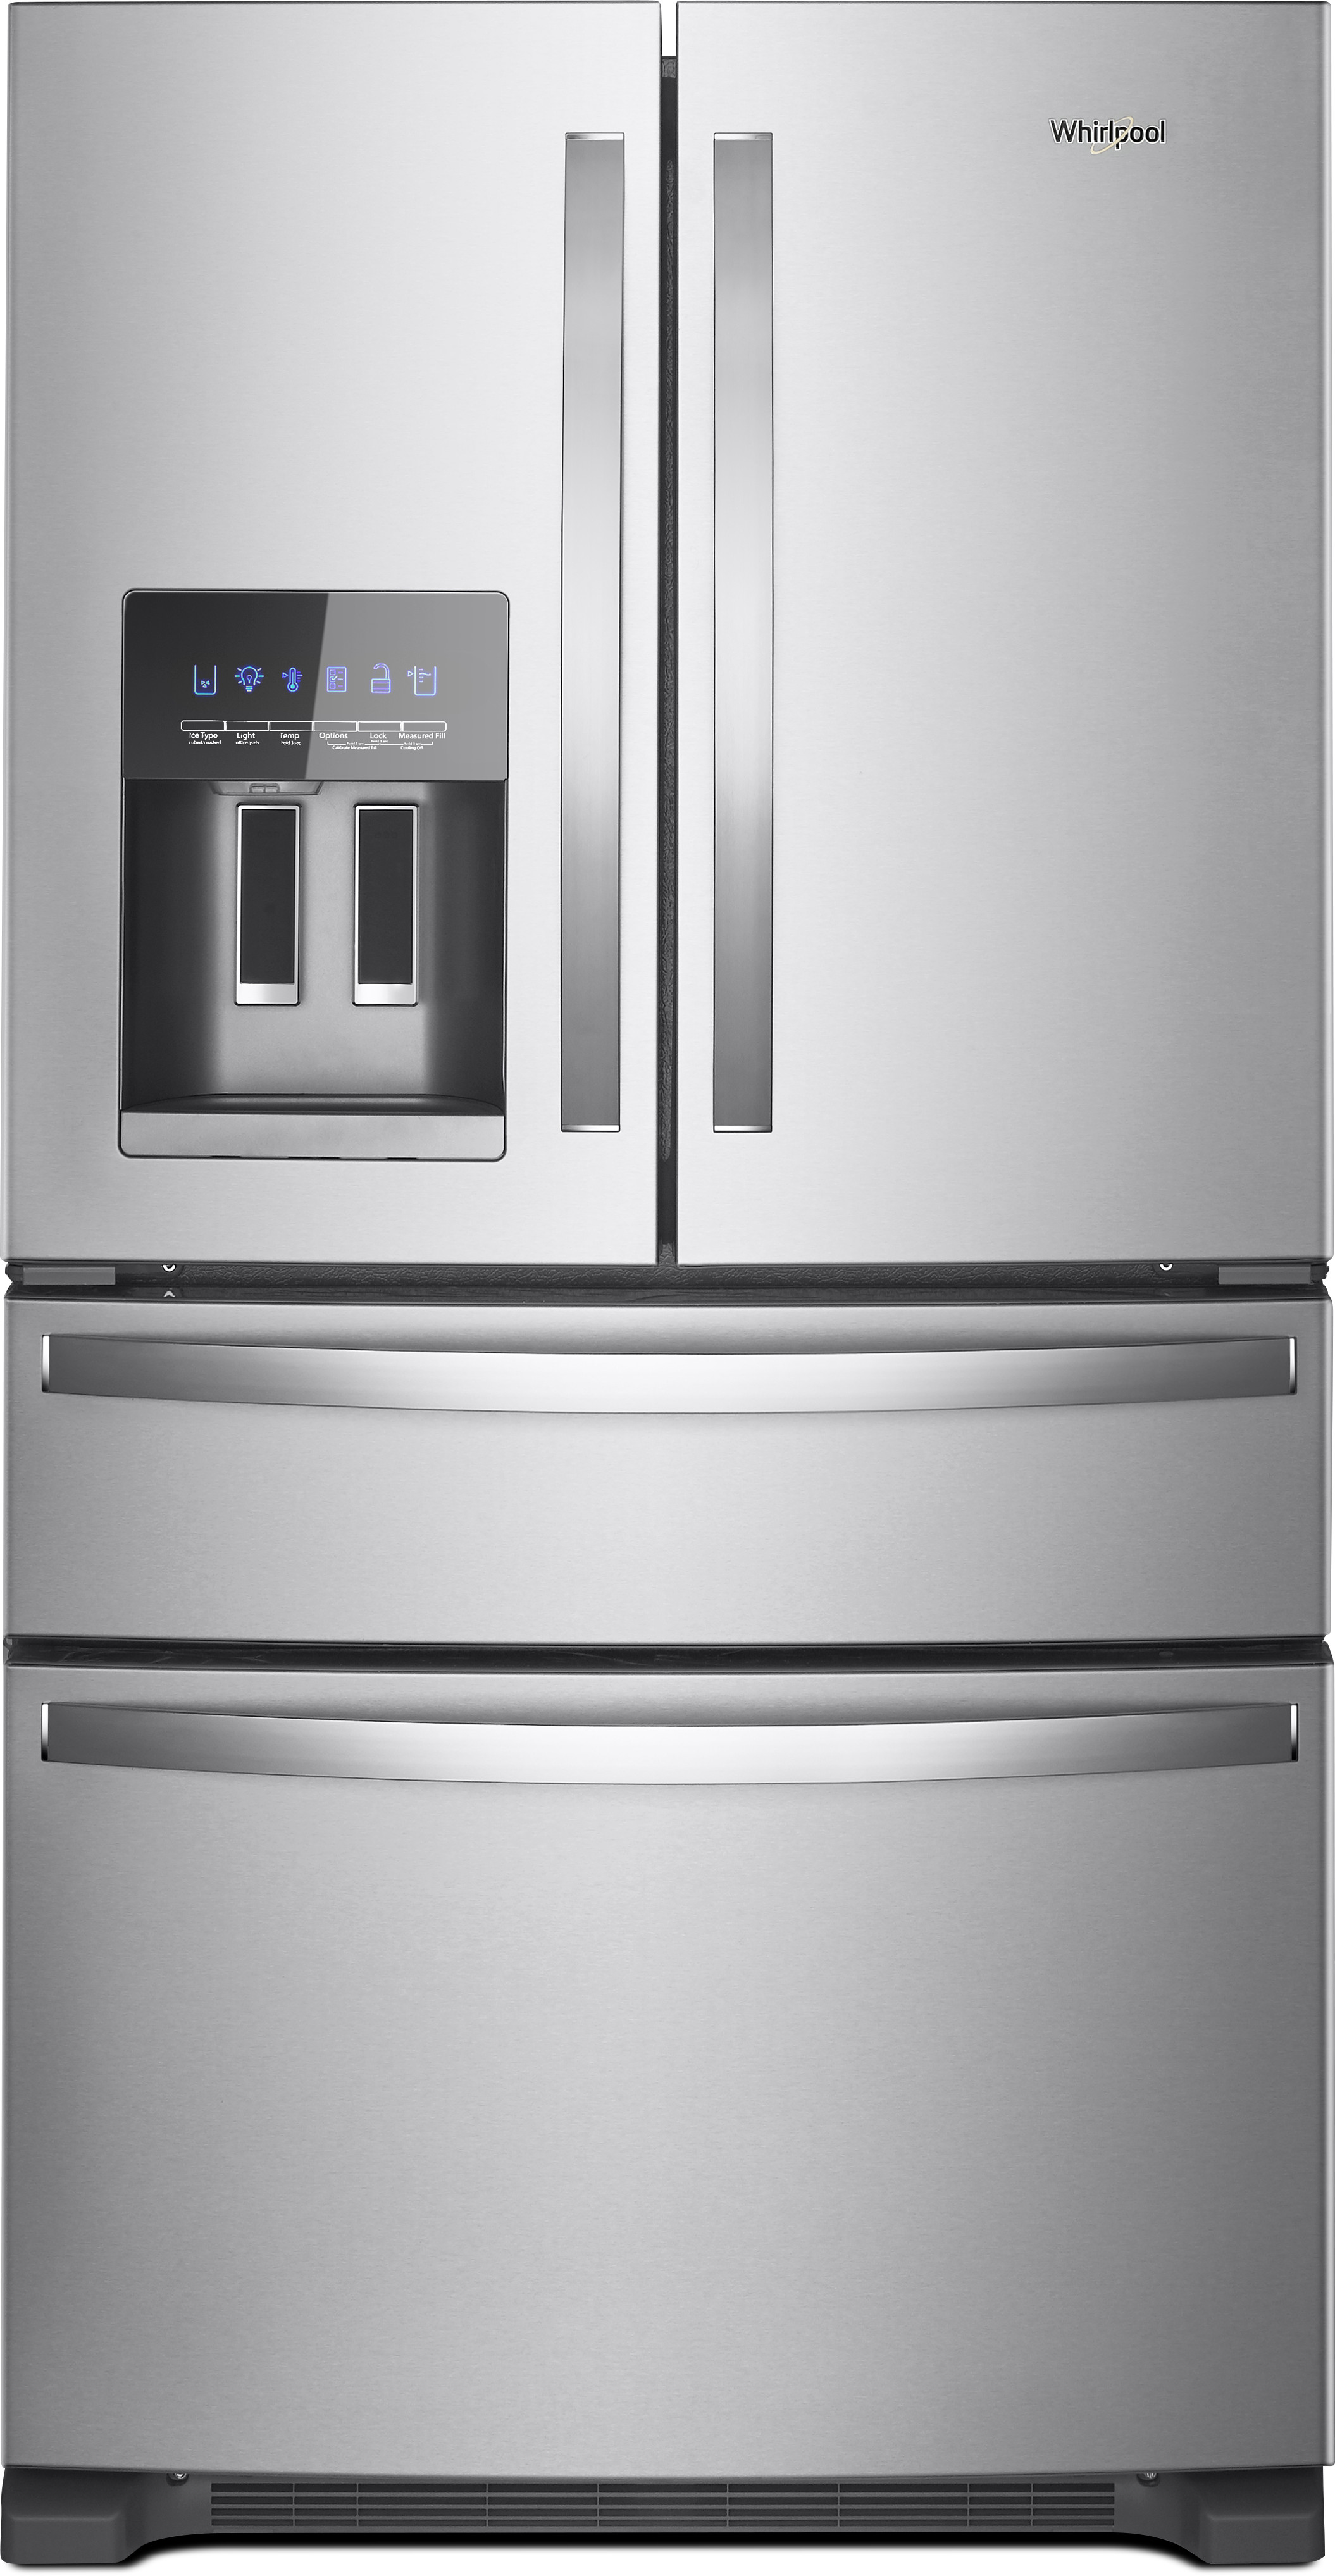 Whirlpool WRX735SDHZ 36 Inch 4-Door French Door Refrigerator with 25 cu. ft. Capacity, Spillproof Glass Shelving, Humidity-Controlled Crispers, Adaptive Defrost, Accu-Chill™ Temperature, Ice Maker, Exterior Ice/Water Dispenser, EveryDrop™ Filtration